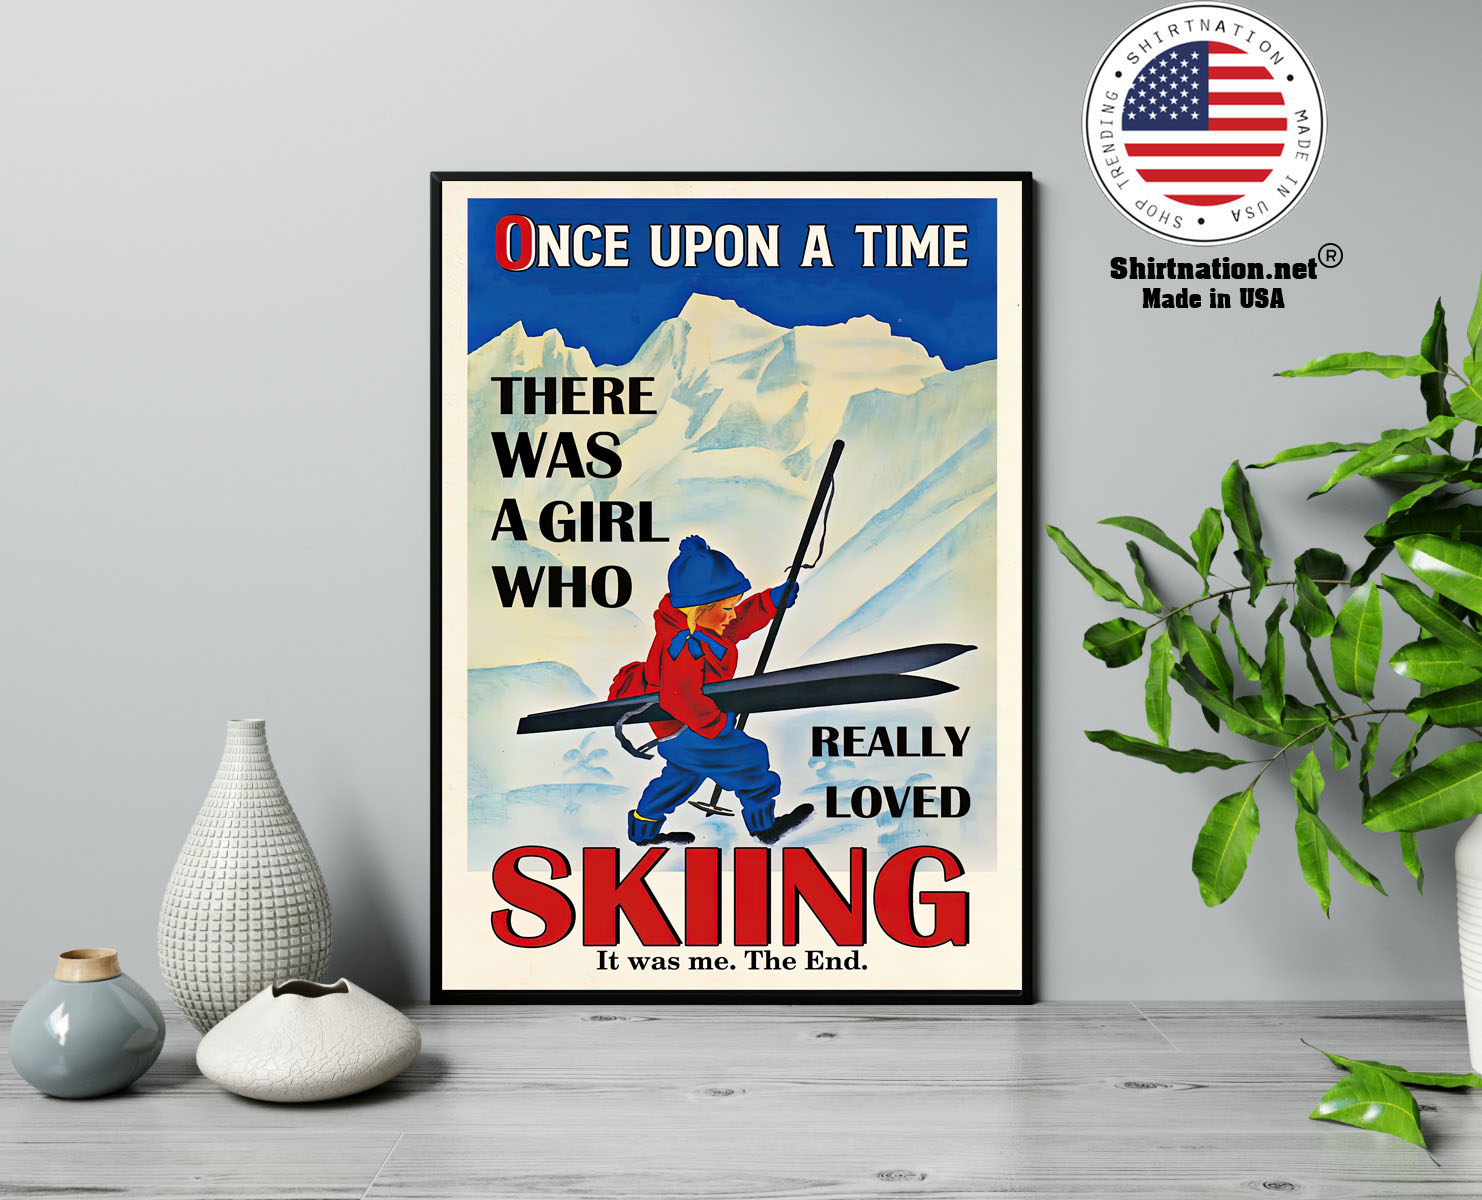 Once upon a time there was a girl who really loved skiing poster 13